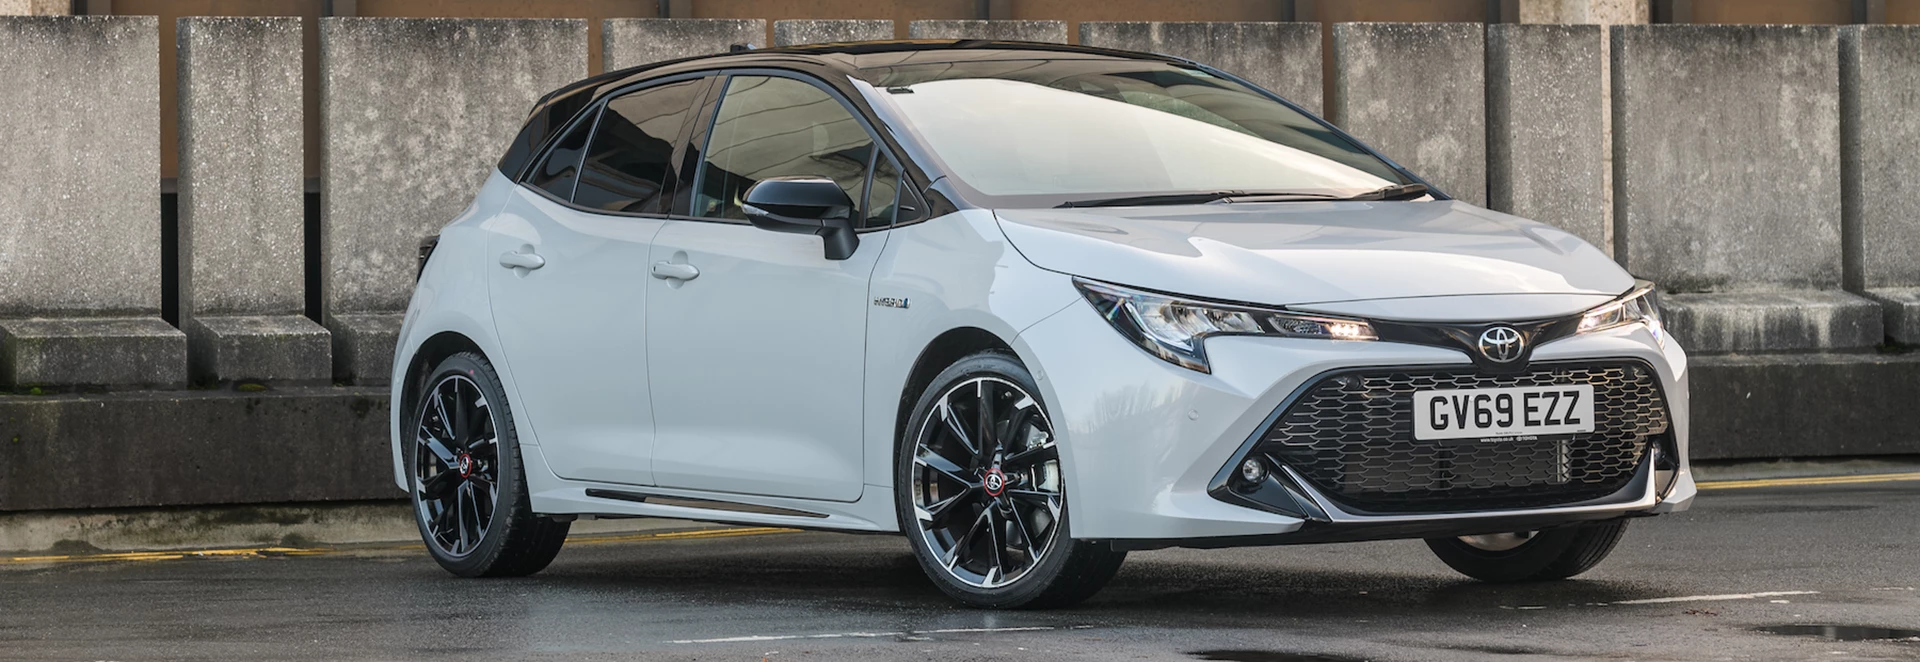 Buyer's guide to the Toyota Corolla - Car Keys